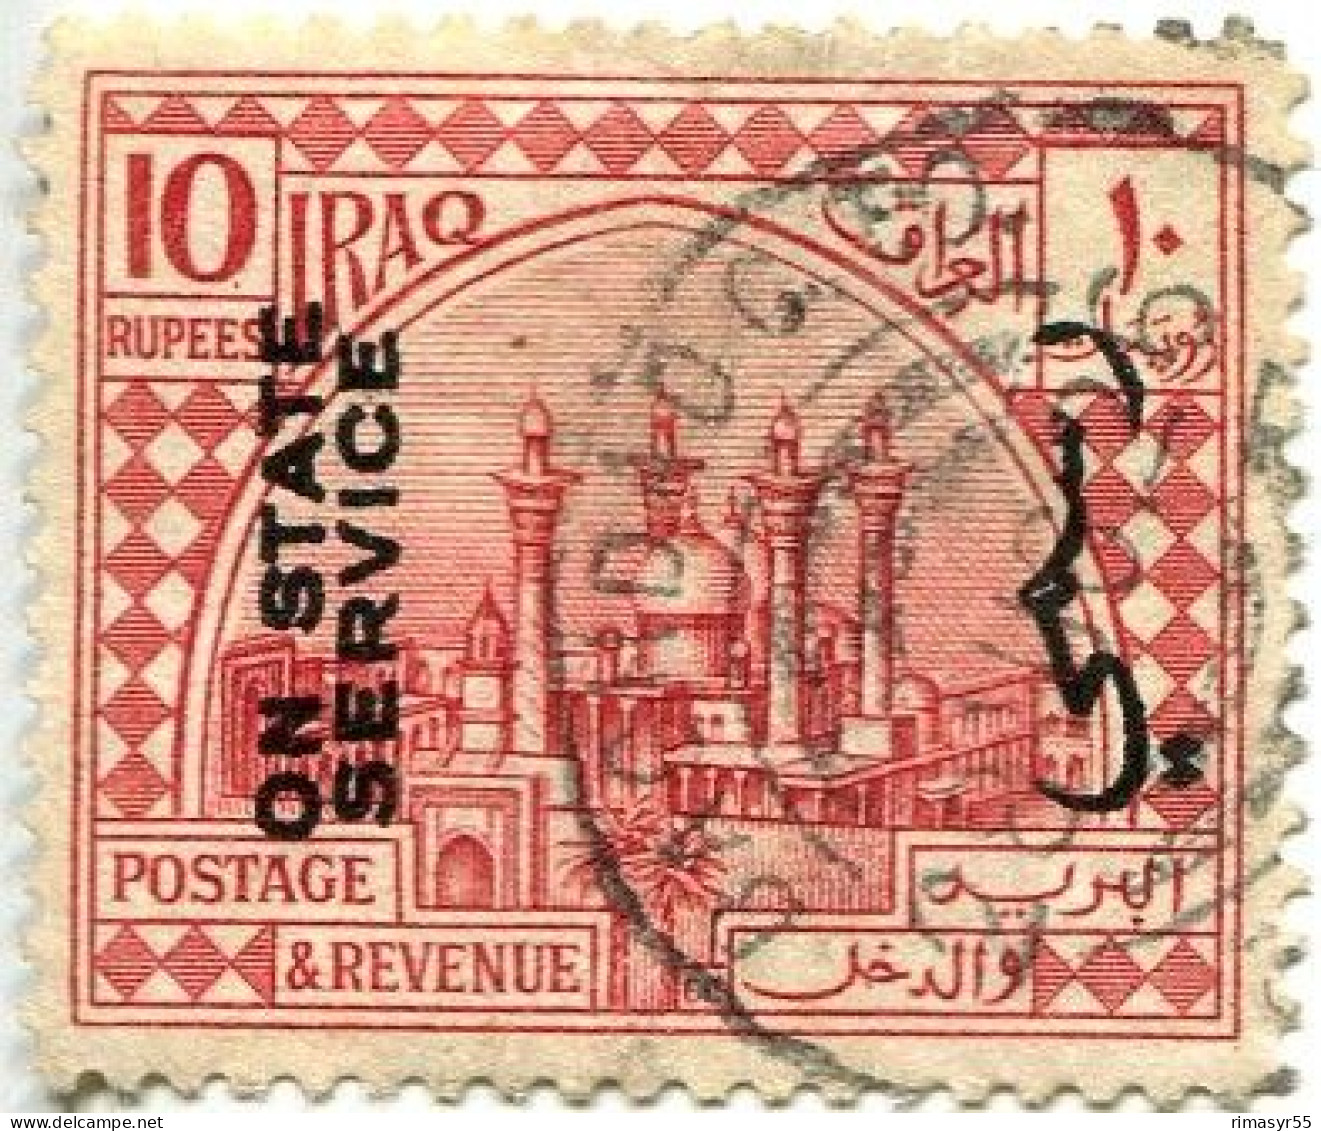 1924-25  Timbre De SERVICE  10 Rupees ON STATE SERVICE - Iraq